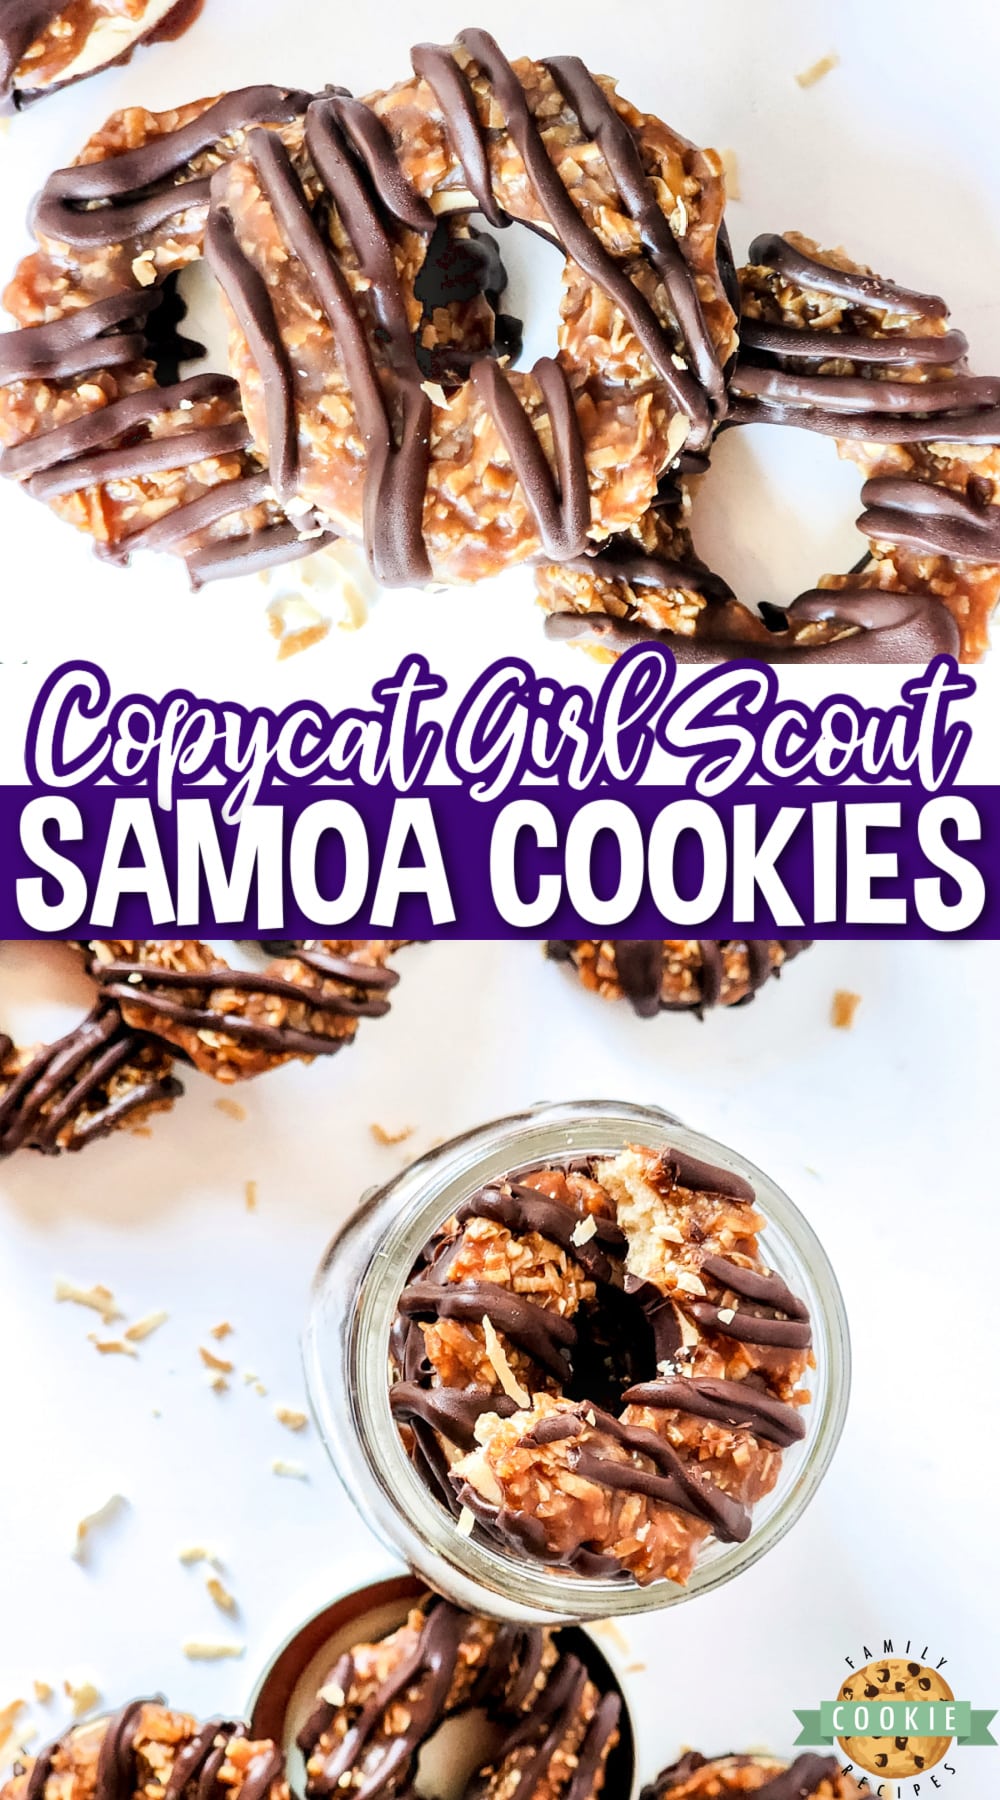 Copycat Samoa Cookies taste just like the Girl Scout cookie version! Delicious cookies made with chocolate, caramel and coconut. 